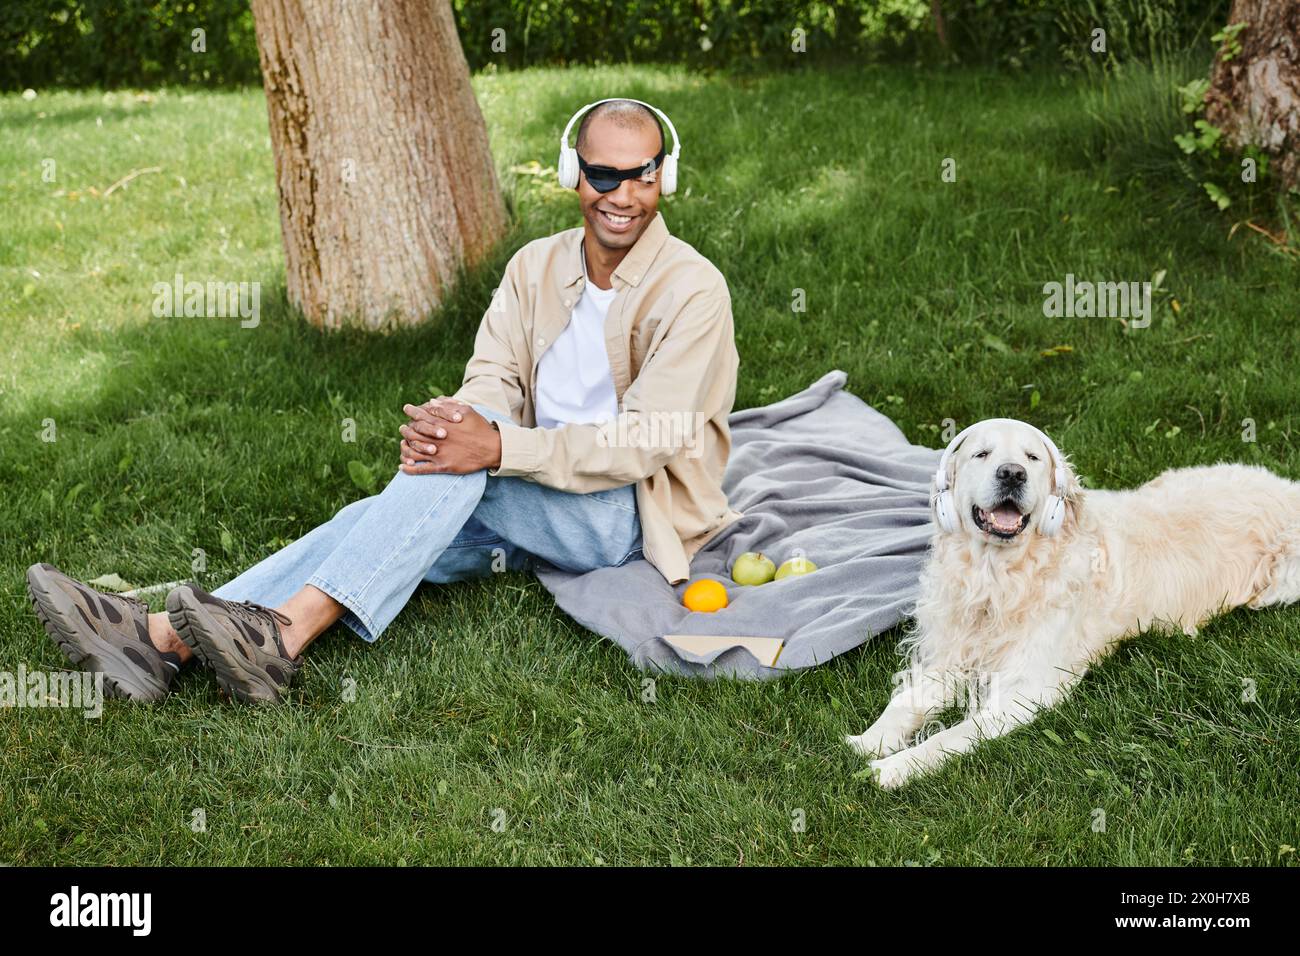 A man with myasthenia gravis syndrome sits on a blanket next to his loyal Labrador dog, lost in thought. Stock Photo